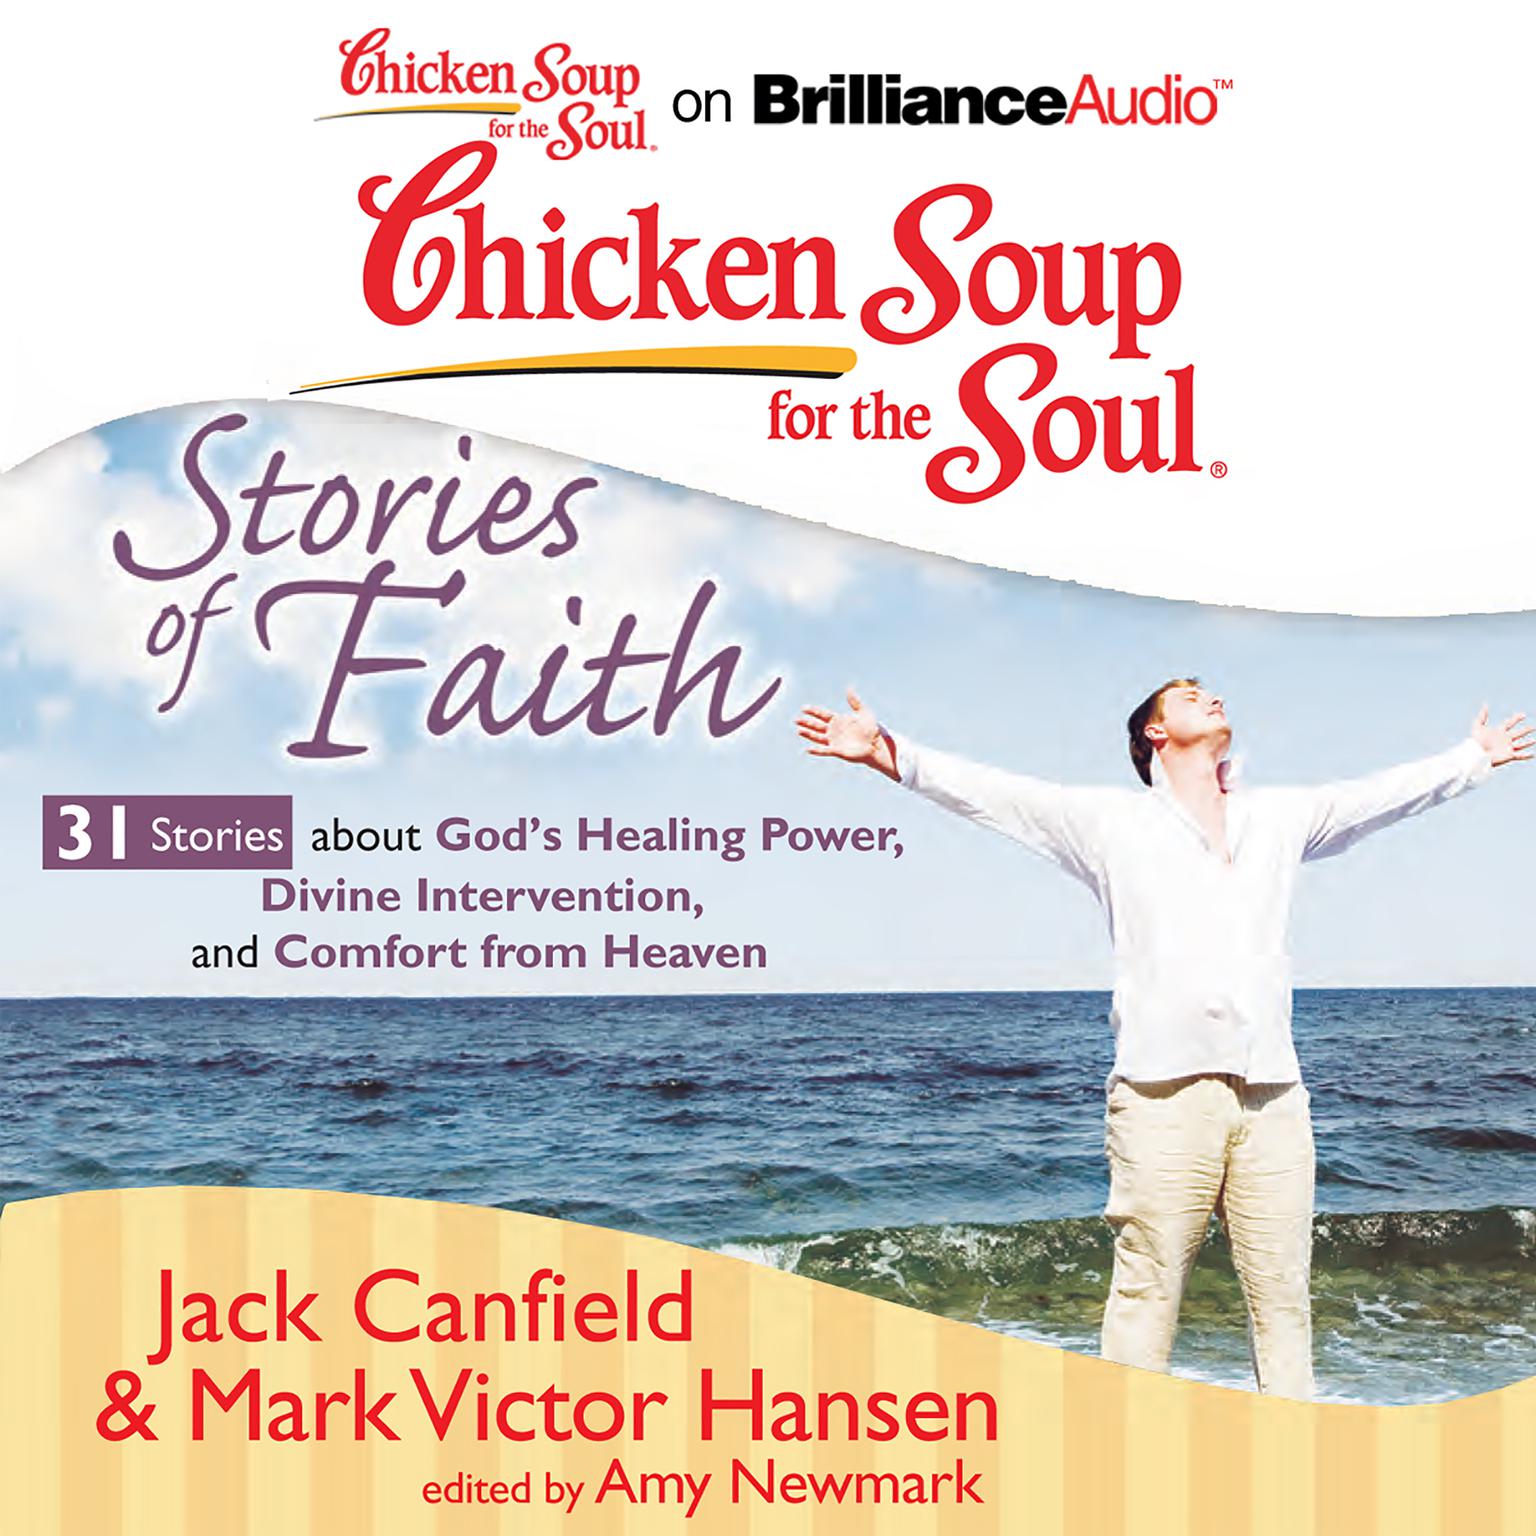 Chicken Soup for the Soul: Stories of Faith - 31 Stories about Gods Healing Power, Divine Intervention, and Comfort from Heaven Audiobook, by Jack Canfield